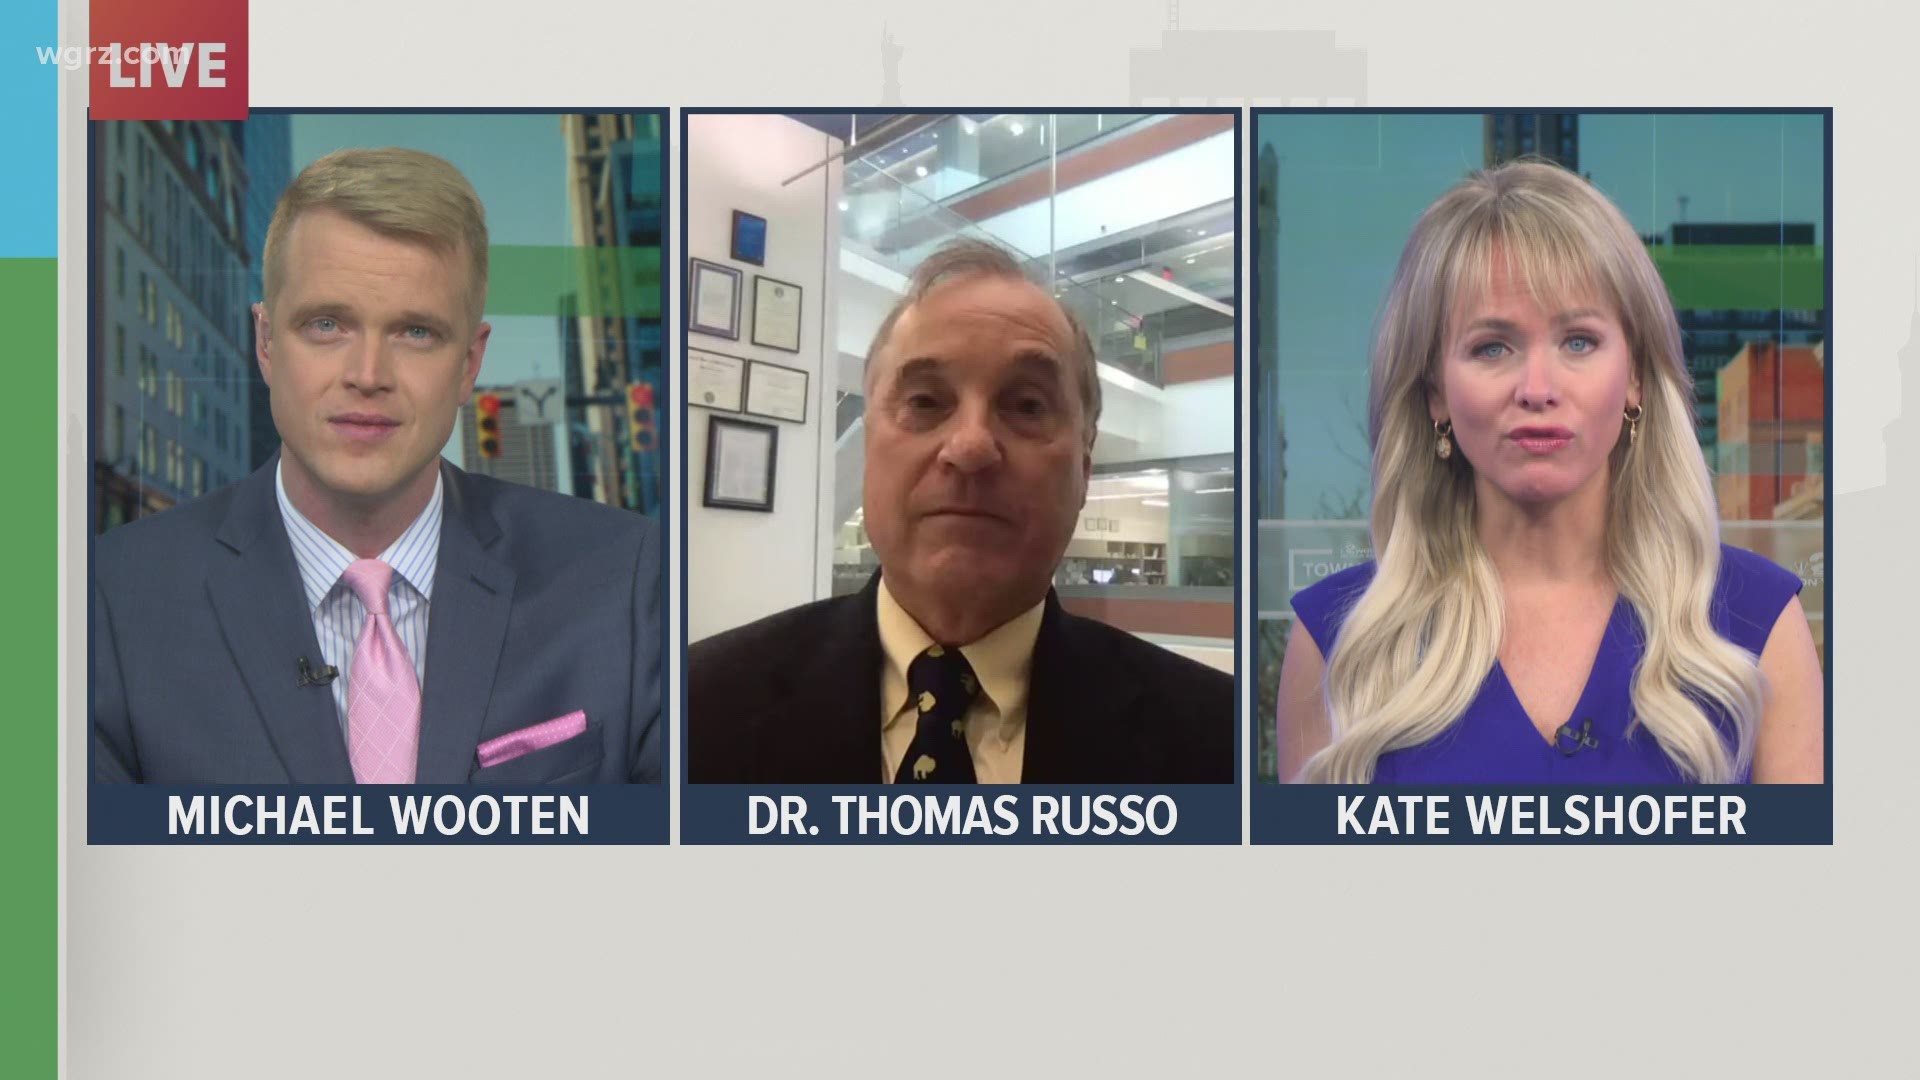 Dr. Thomas Russo, the chief of infectious diseases at the University at Buffalo's medical school, discusses the vaccine mandate to go to Bills or Sabres games.